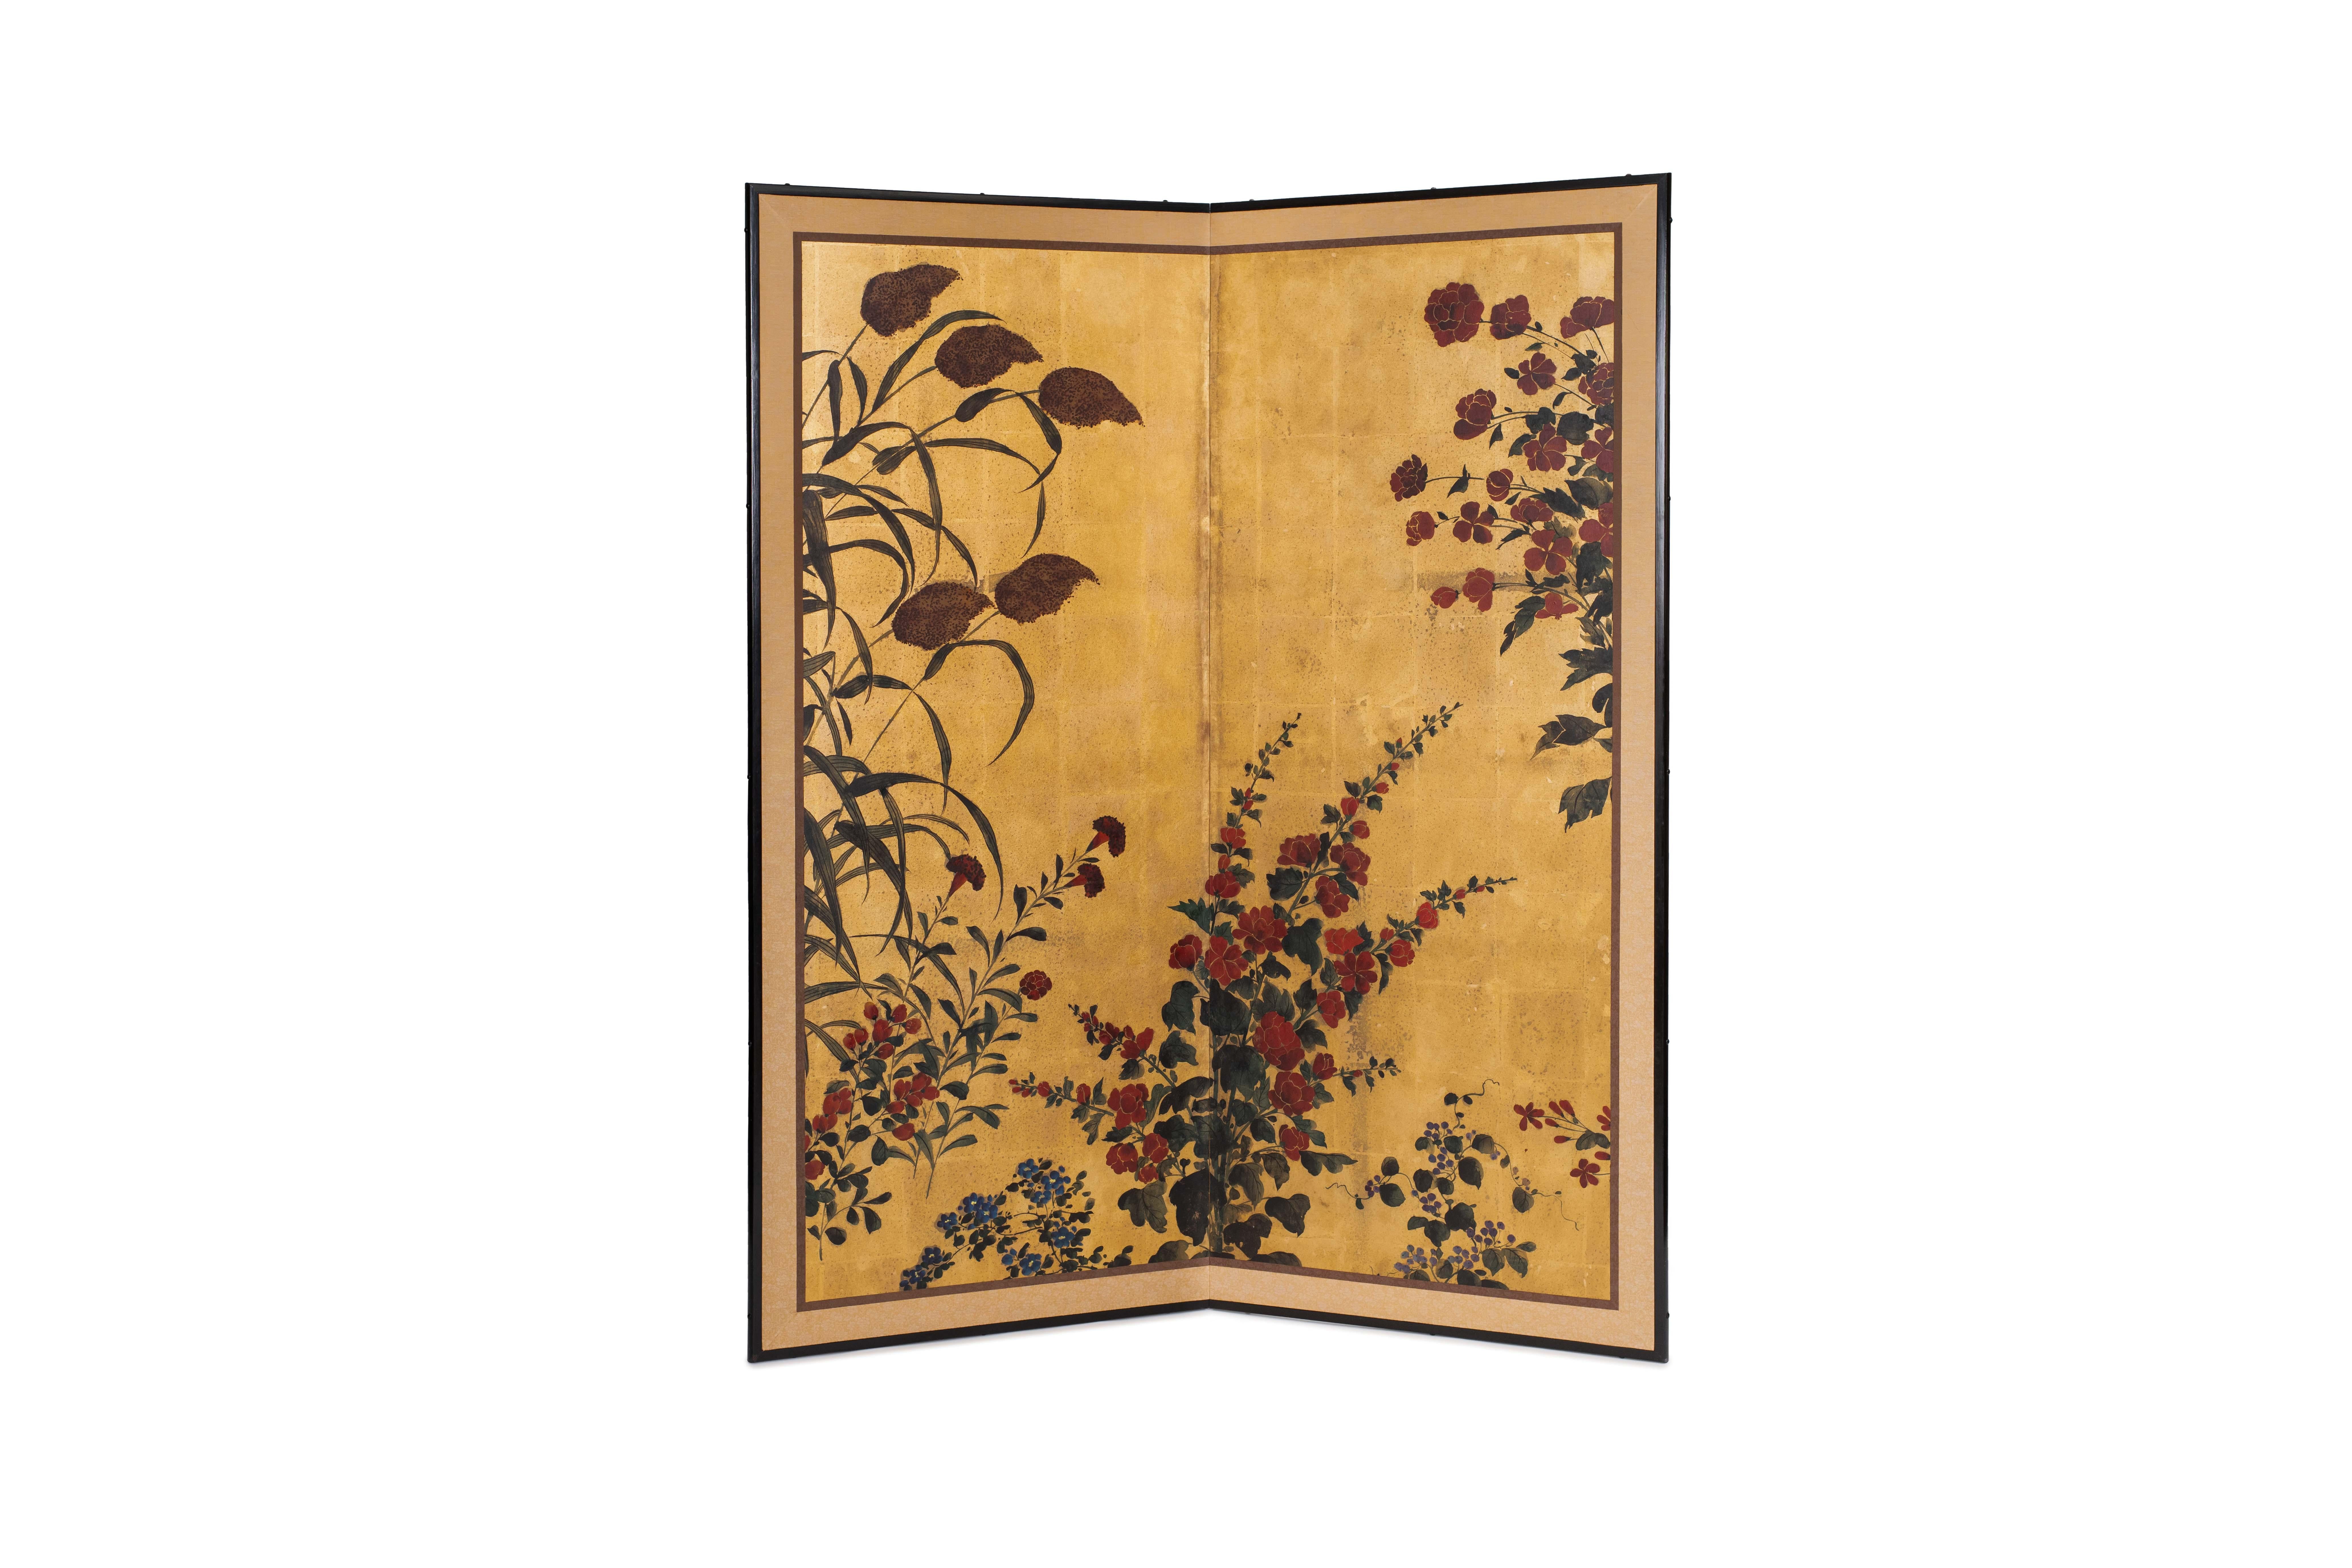 The flowering grasses and bamboo painting of this two-panel screen is hand-painted in watercolor, on squares of gold leaf which are applied by hand to the paper base over carefully jointed wooden lattice frames. Lacquer rails are then applied to the